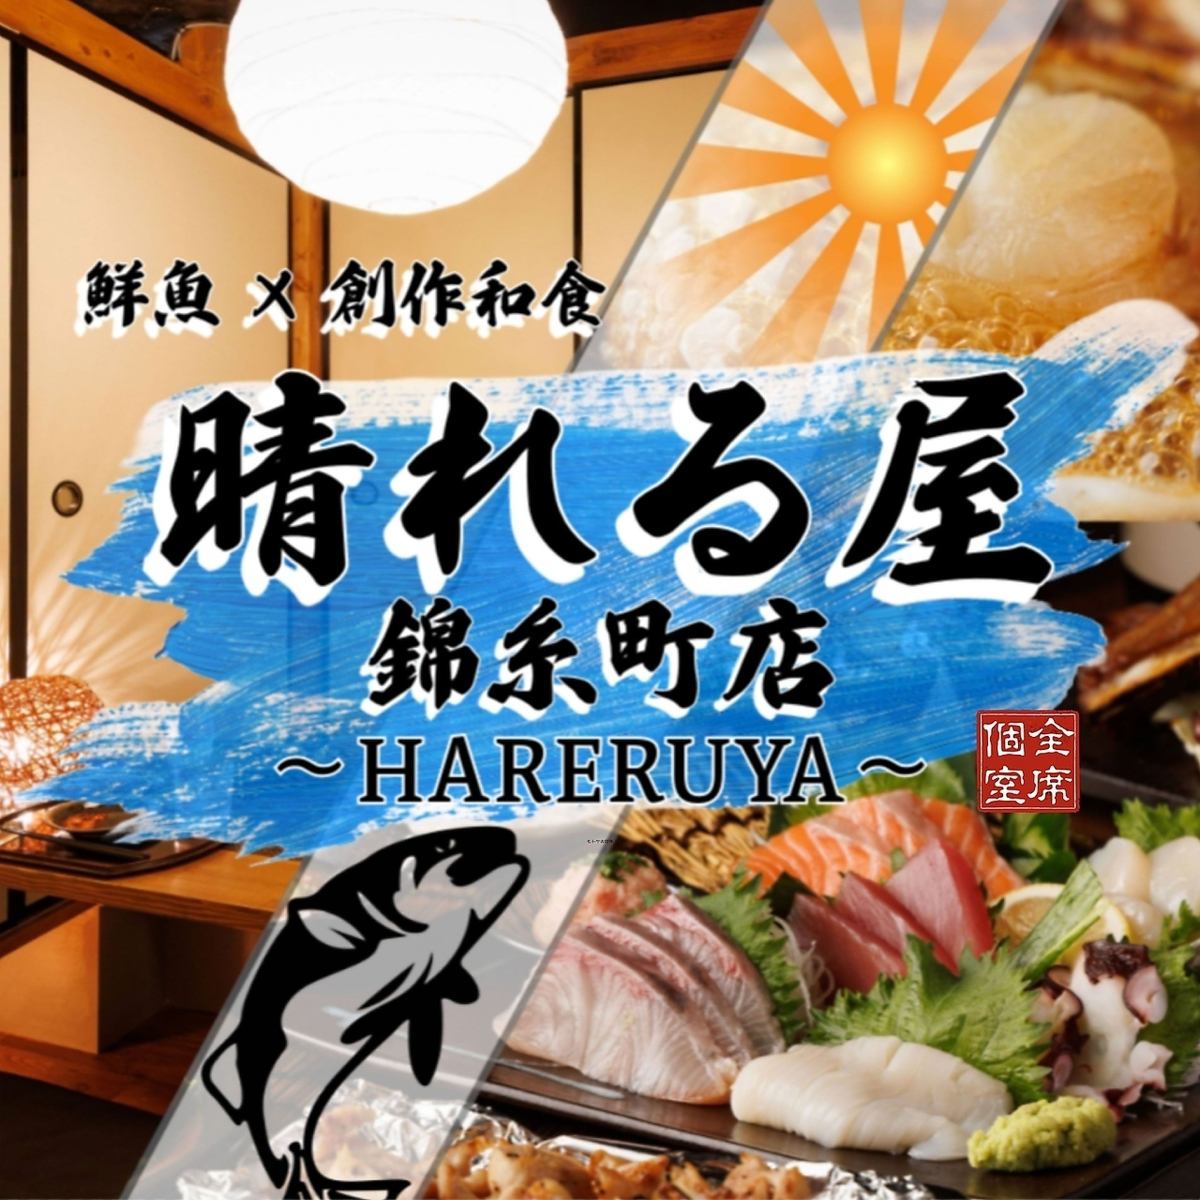 3 minutes walk from Kinshicho Station! All-you-can-drink course starts from 3,280 yen! Directly delivered fresh fish and special dishes x all seats in completely private rooms